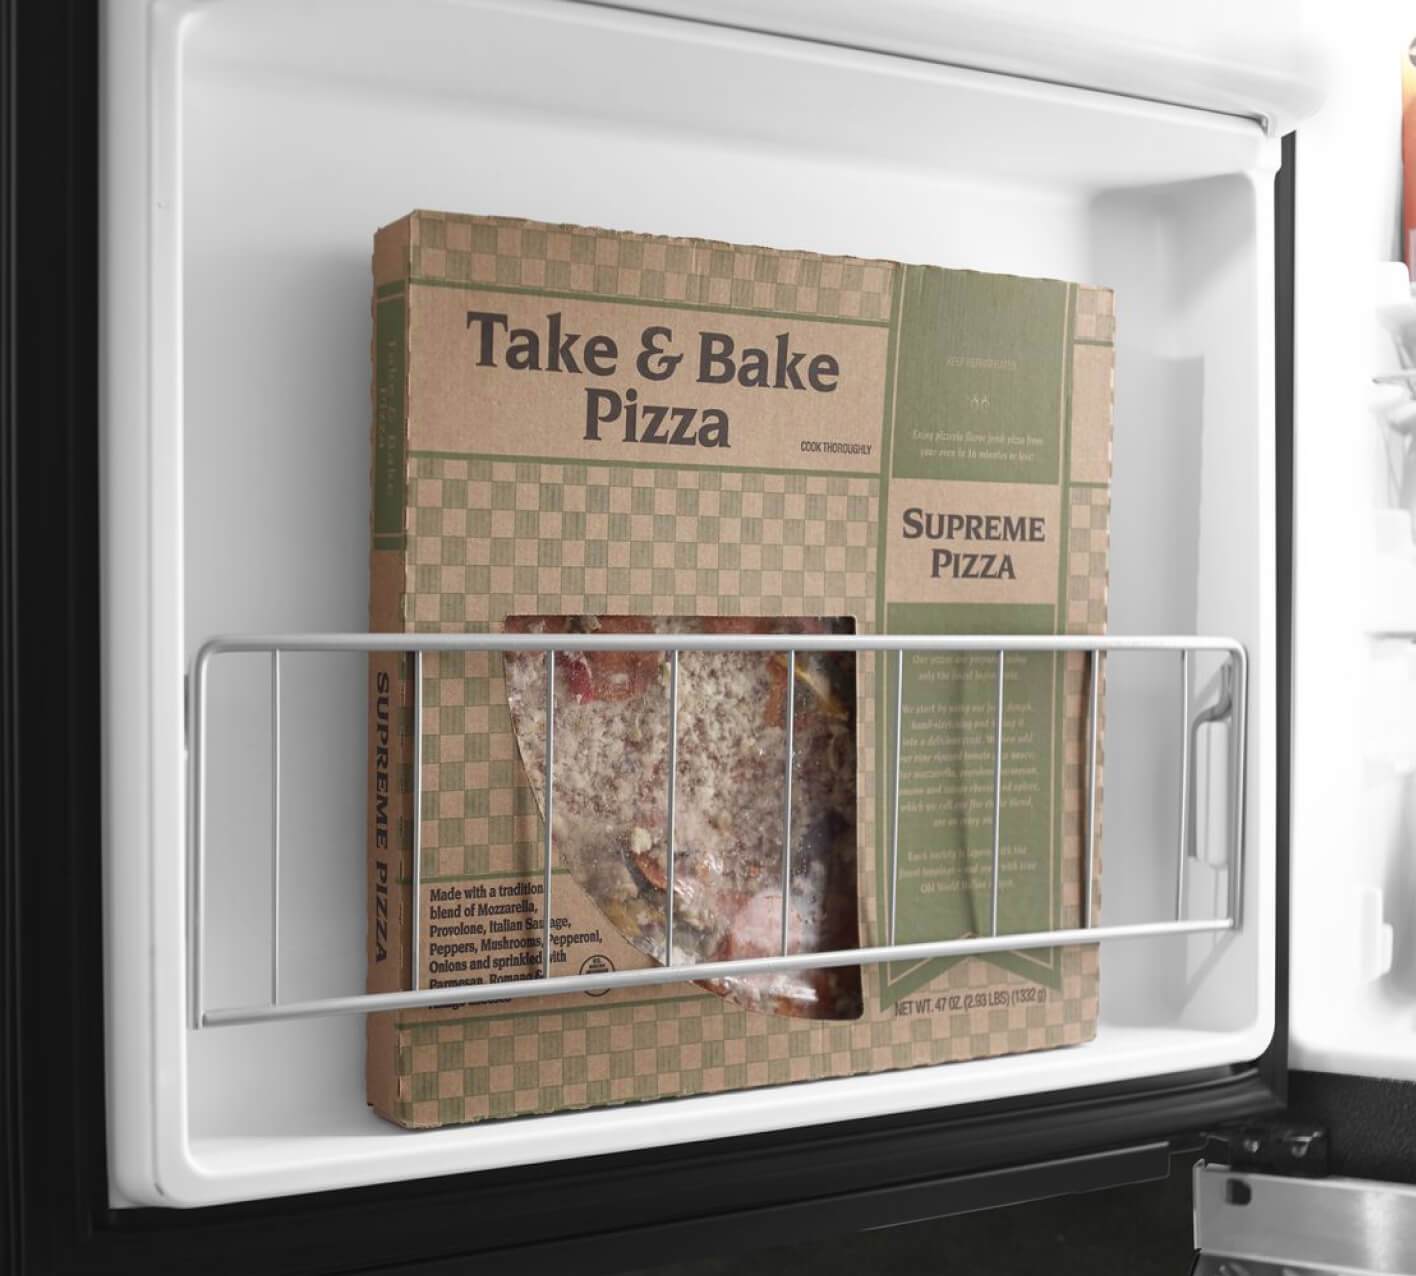 Frozen pizza in the Upright Freezer.